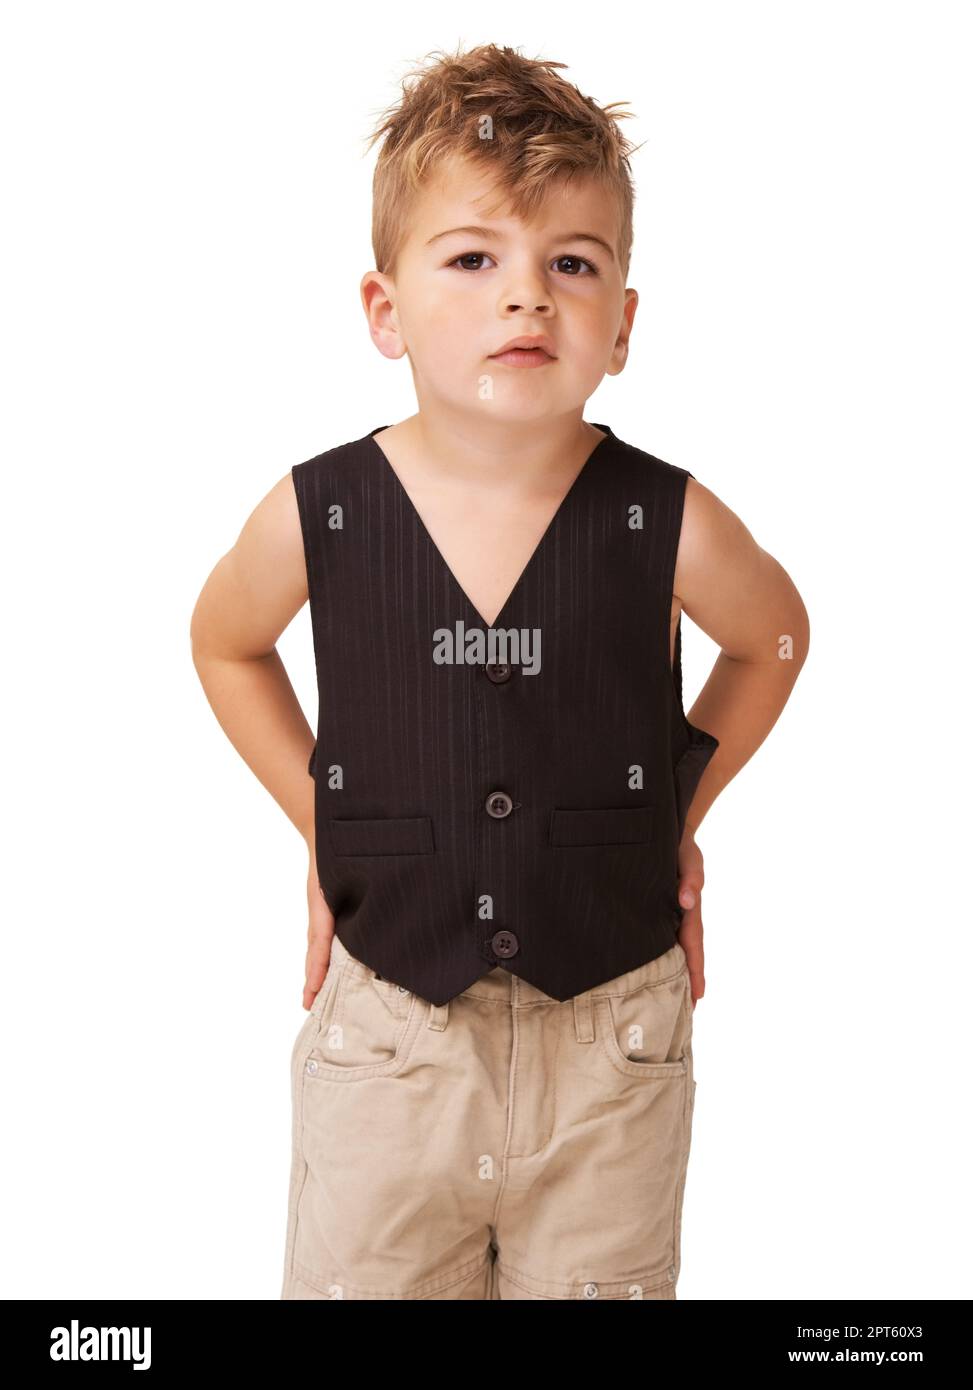 Acting with attitude. A cute little boy posing on a white background Stock Photo